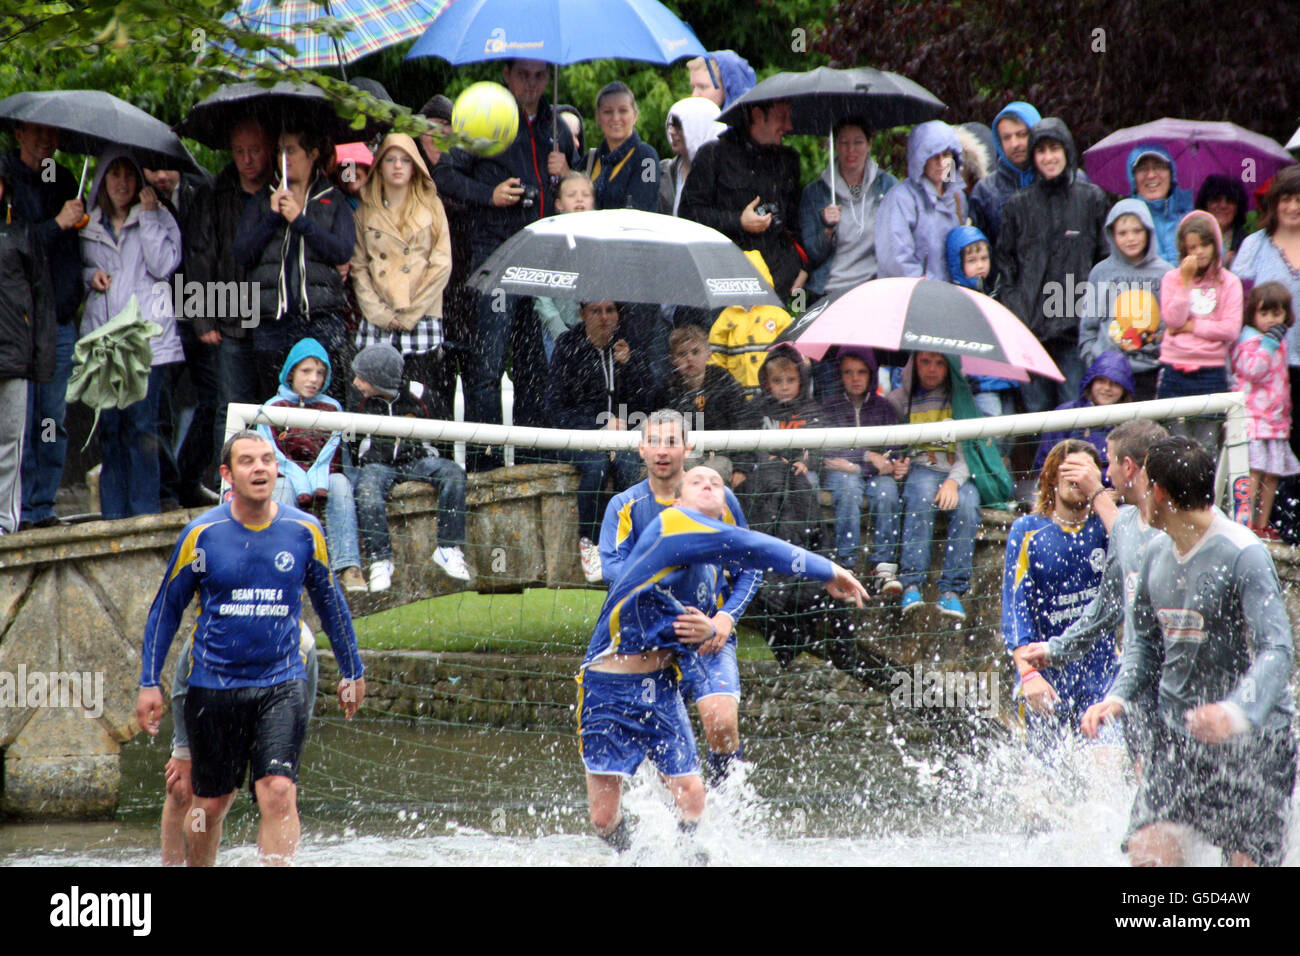 Bourton Rovers 1st XI, playing in light blue, clash with Bourton Rovers 2nd XI during the annual August Bank Holiday Monday River Football match at Bourton on the Water, Gloucestershire. Picture date: Monday August 27, 2012. The match, watched by hundreds of spectators braving the rain, ended 2-2. See PA story SPORT River. Photo credit should read: Rod Minchin/PA Wire Stock Photo